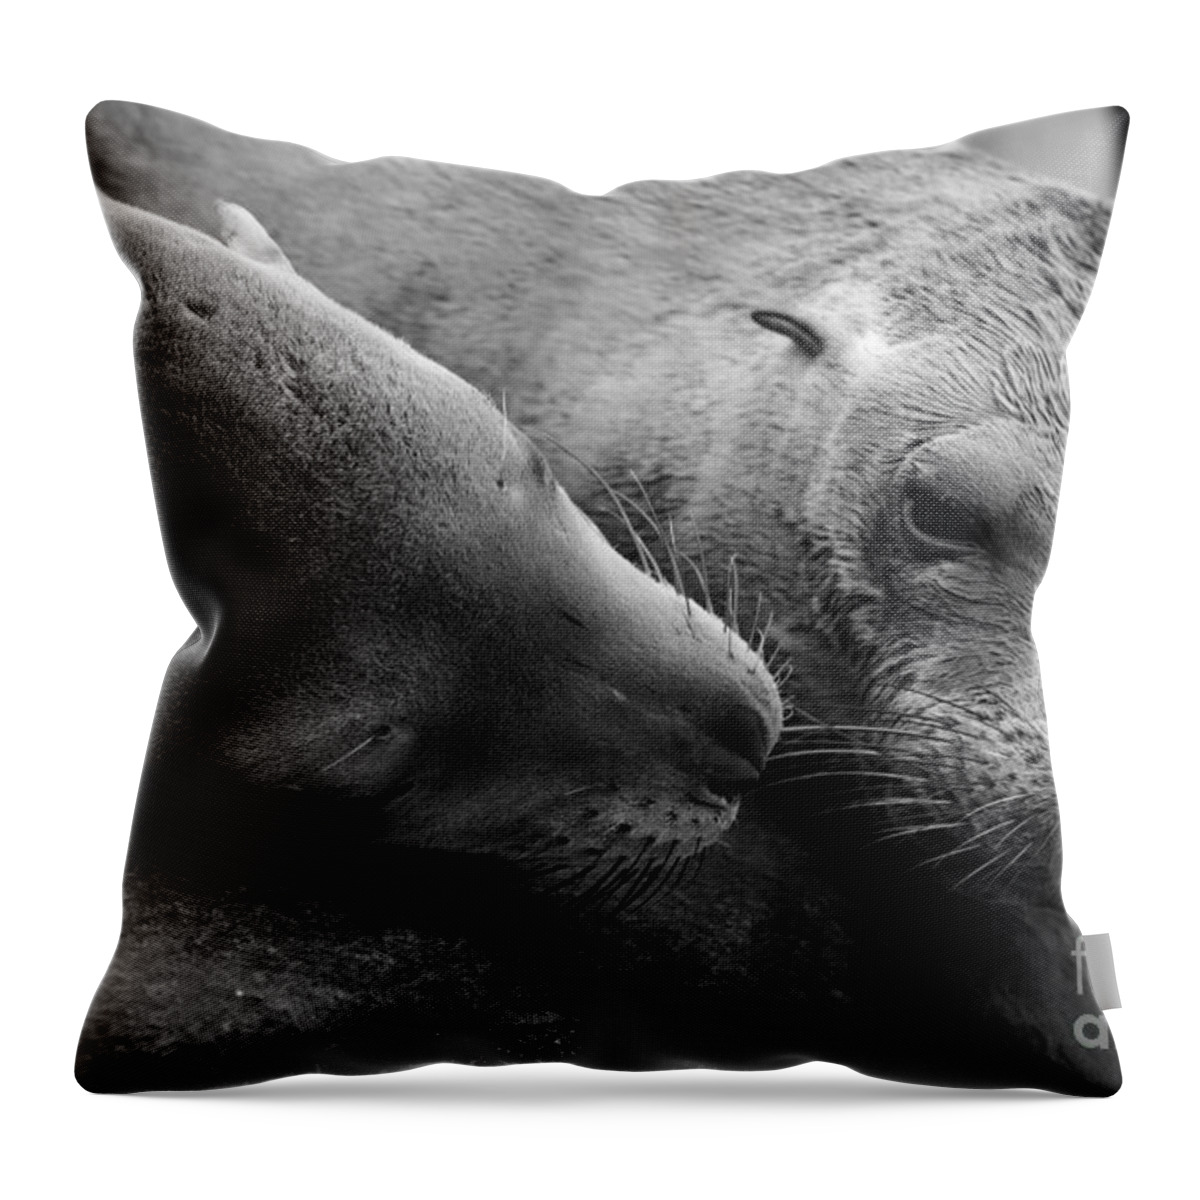 Animals Throw Pillow featuring the photograph Whisker Love by John F Tsumas